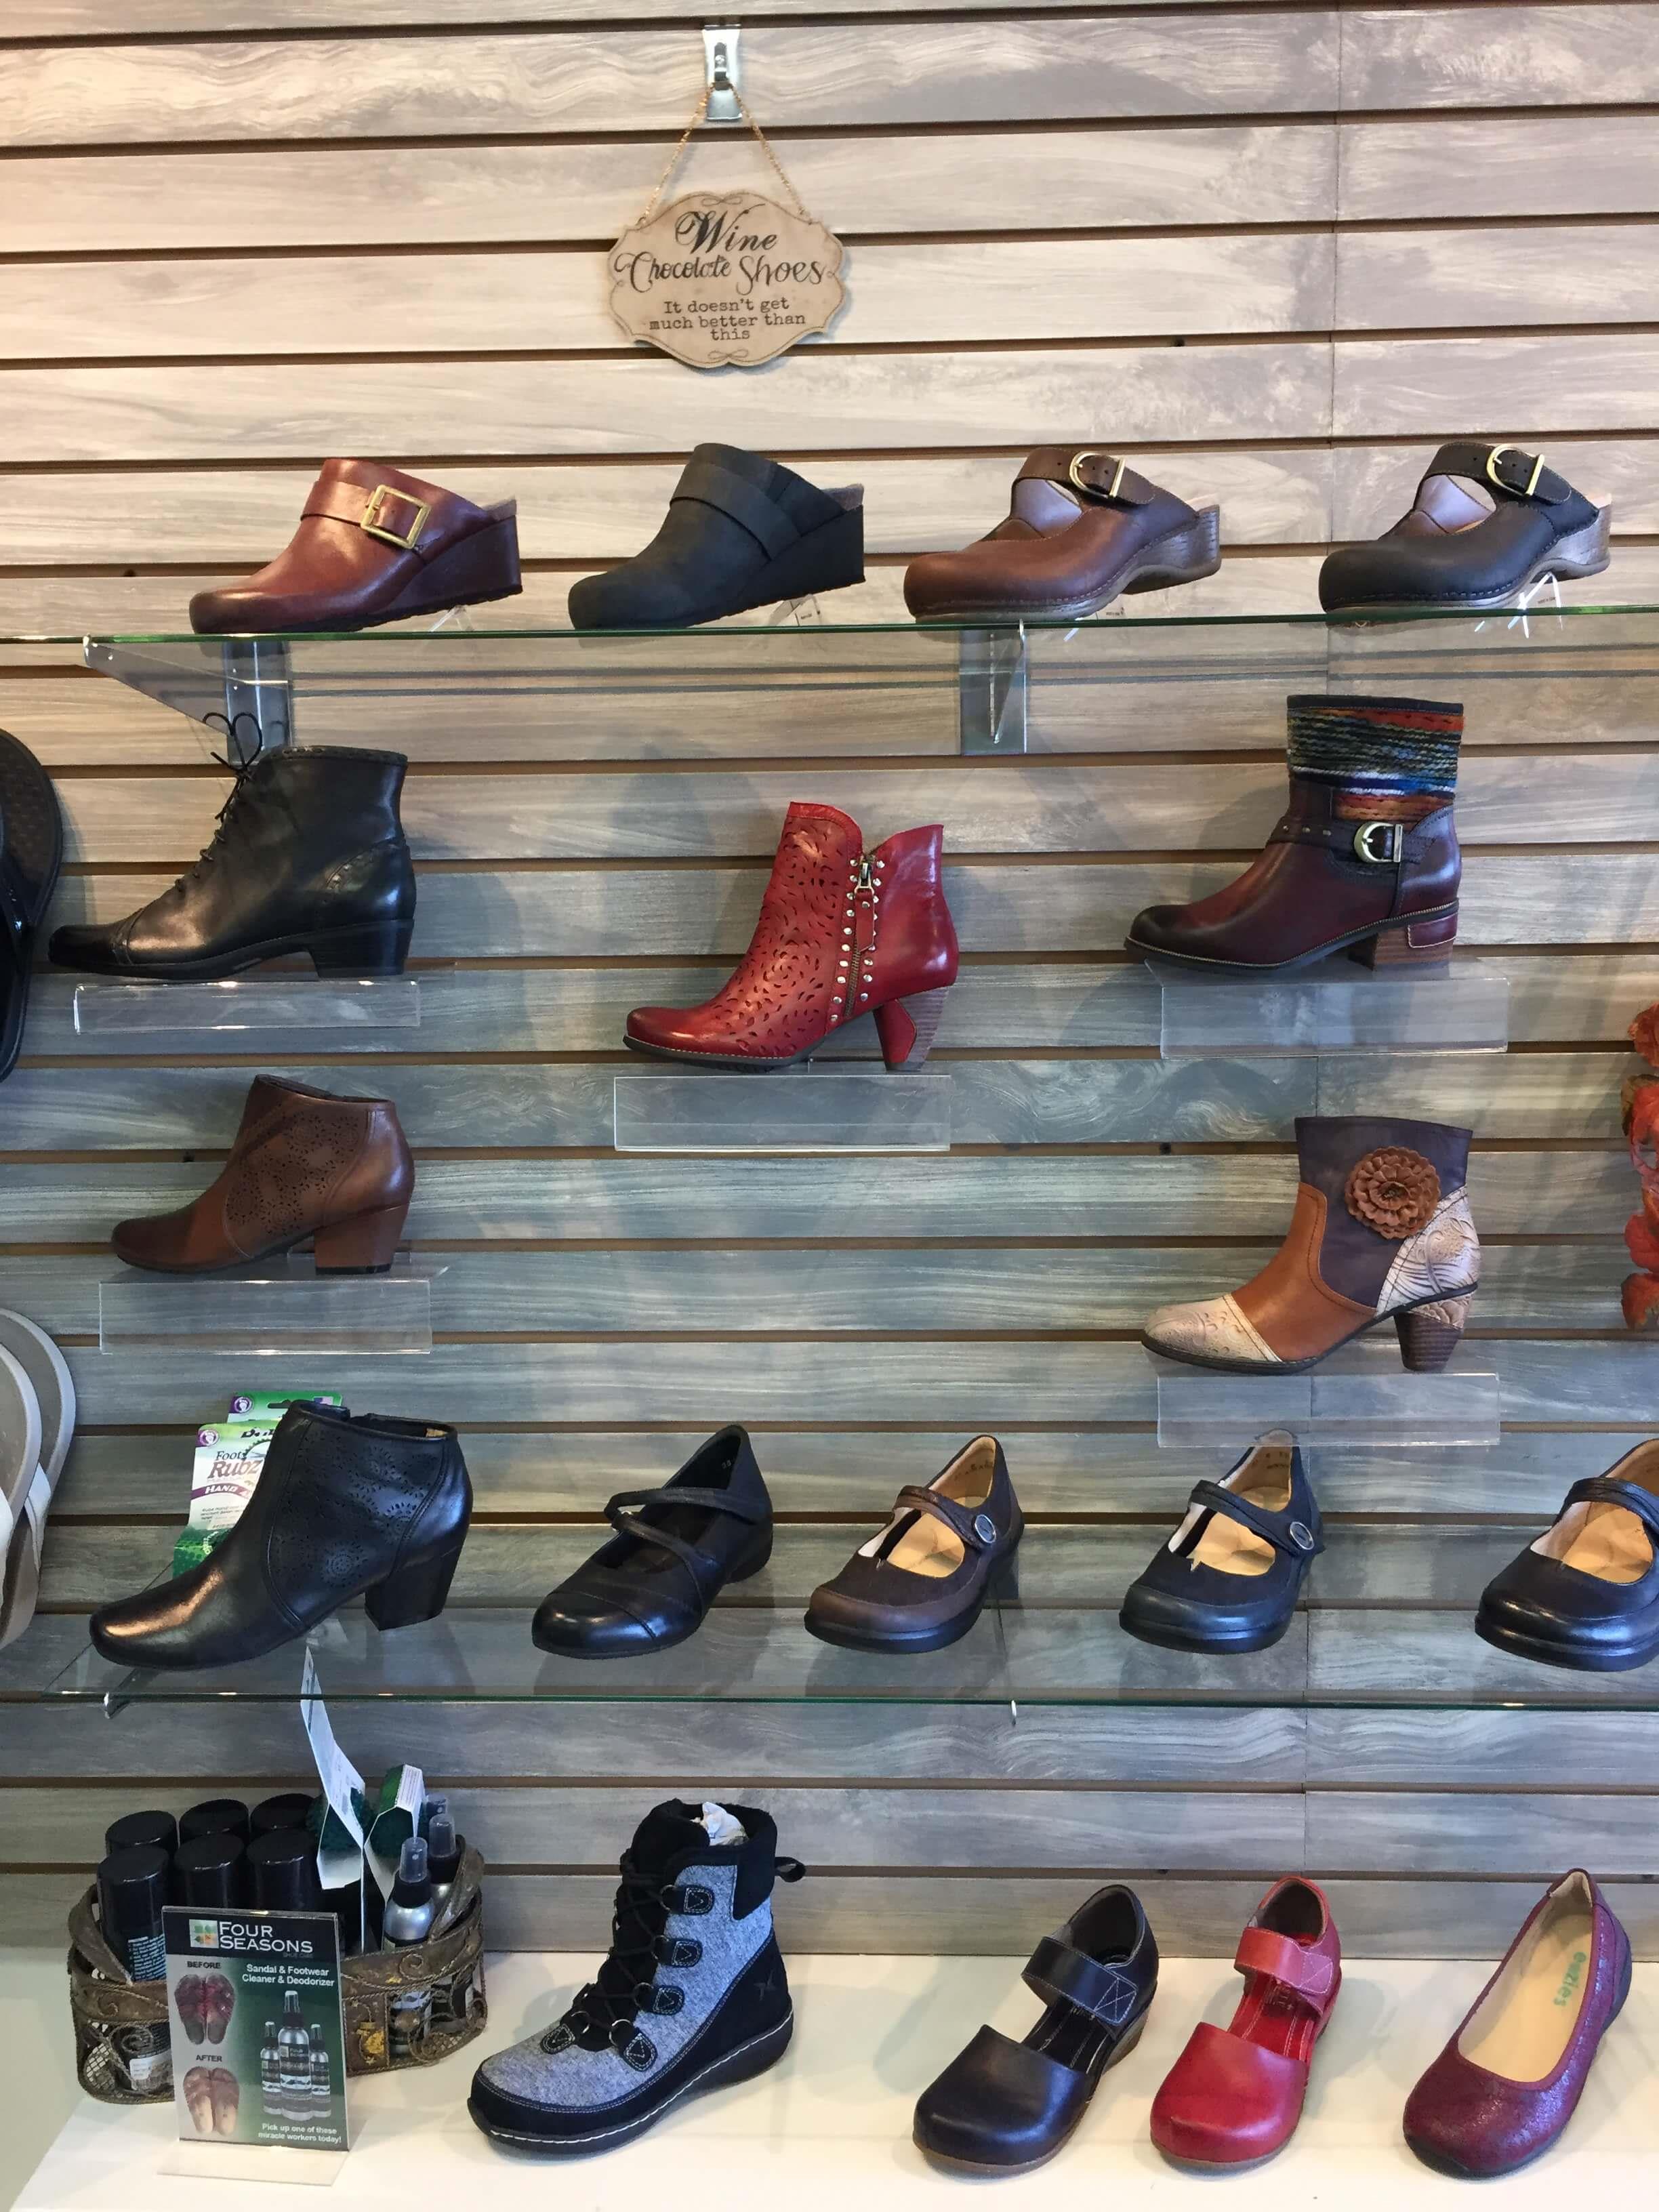 medical shoes stores near me